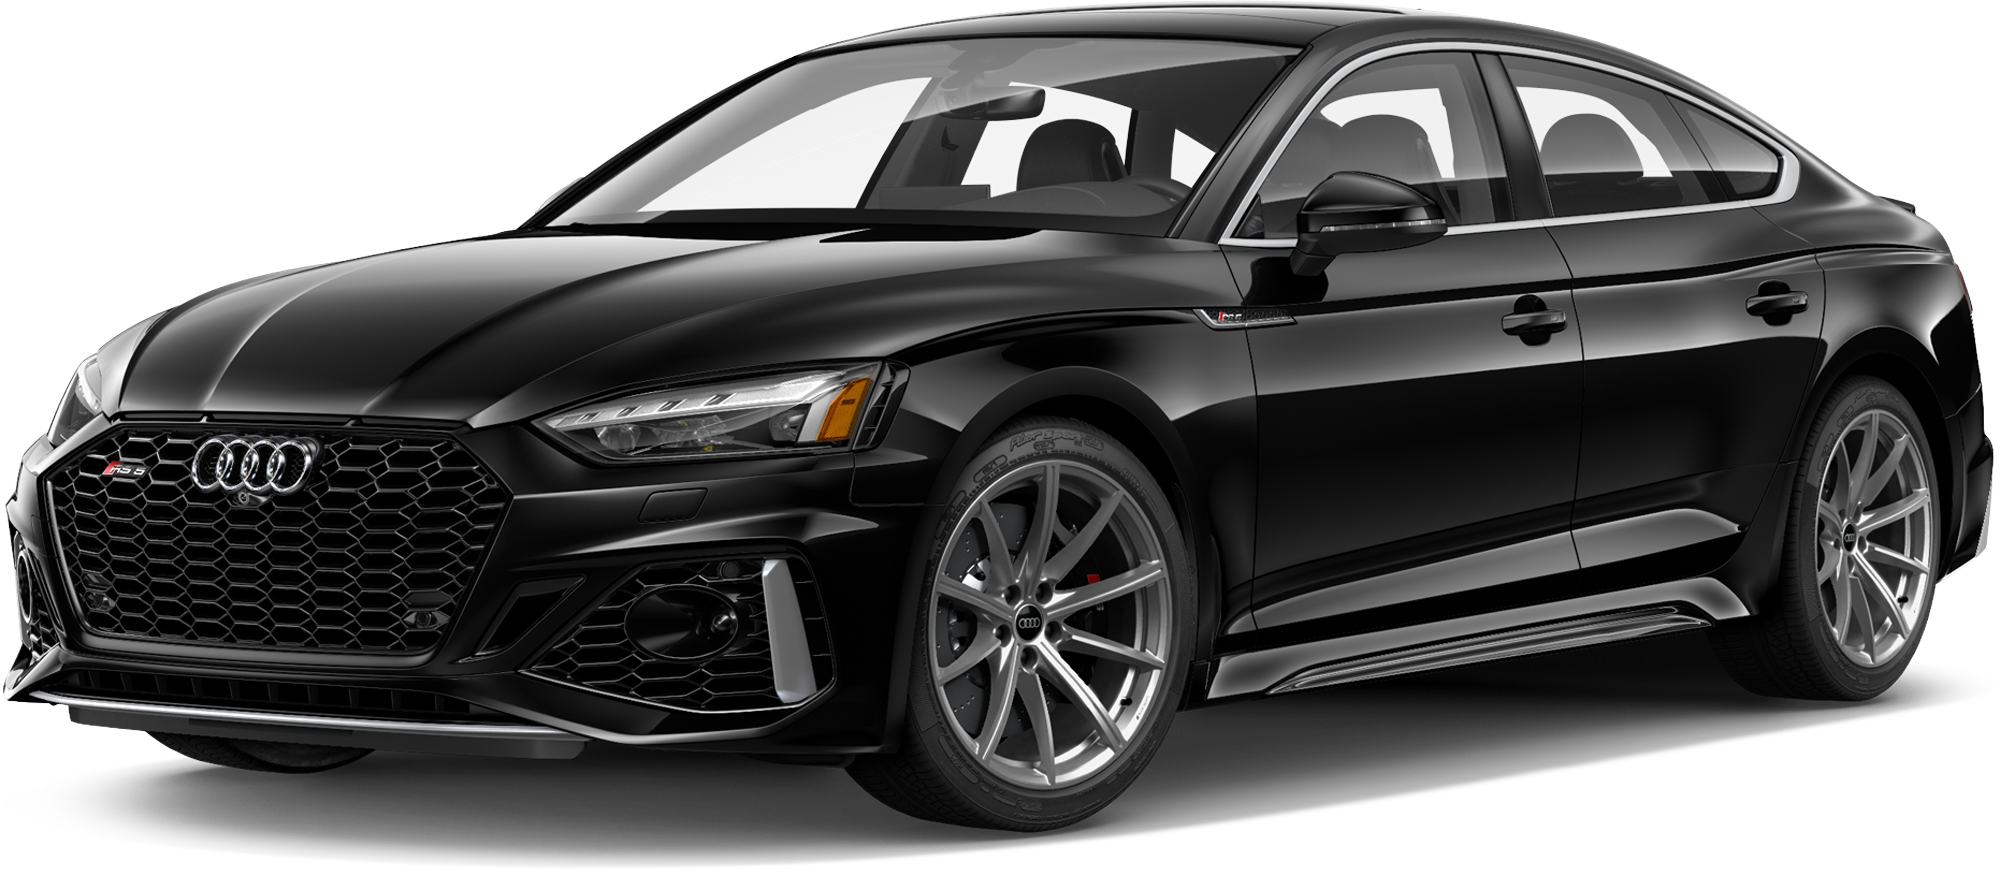 2022 Audi RS 5 Incentives, Specials & Offers in Fort Wayne IN